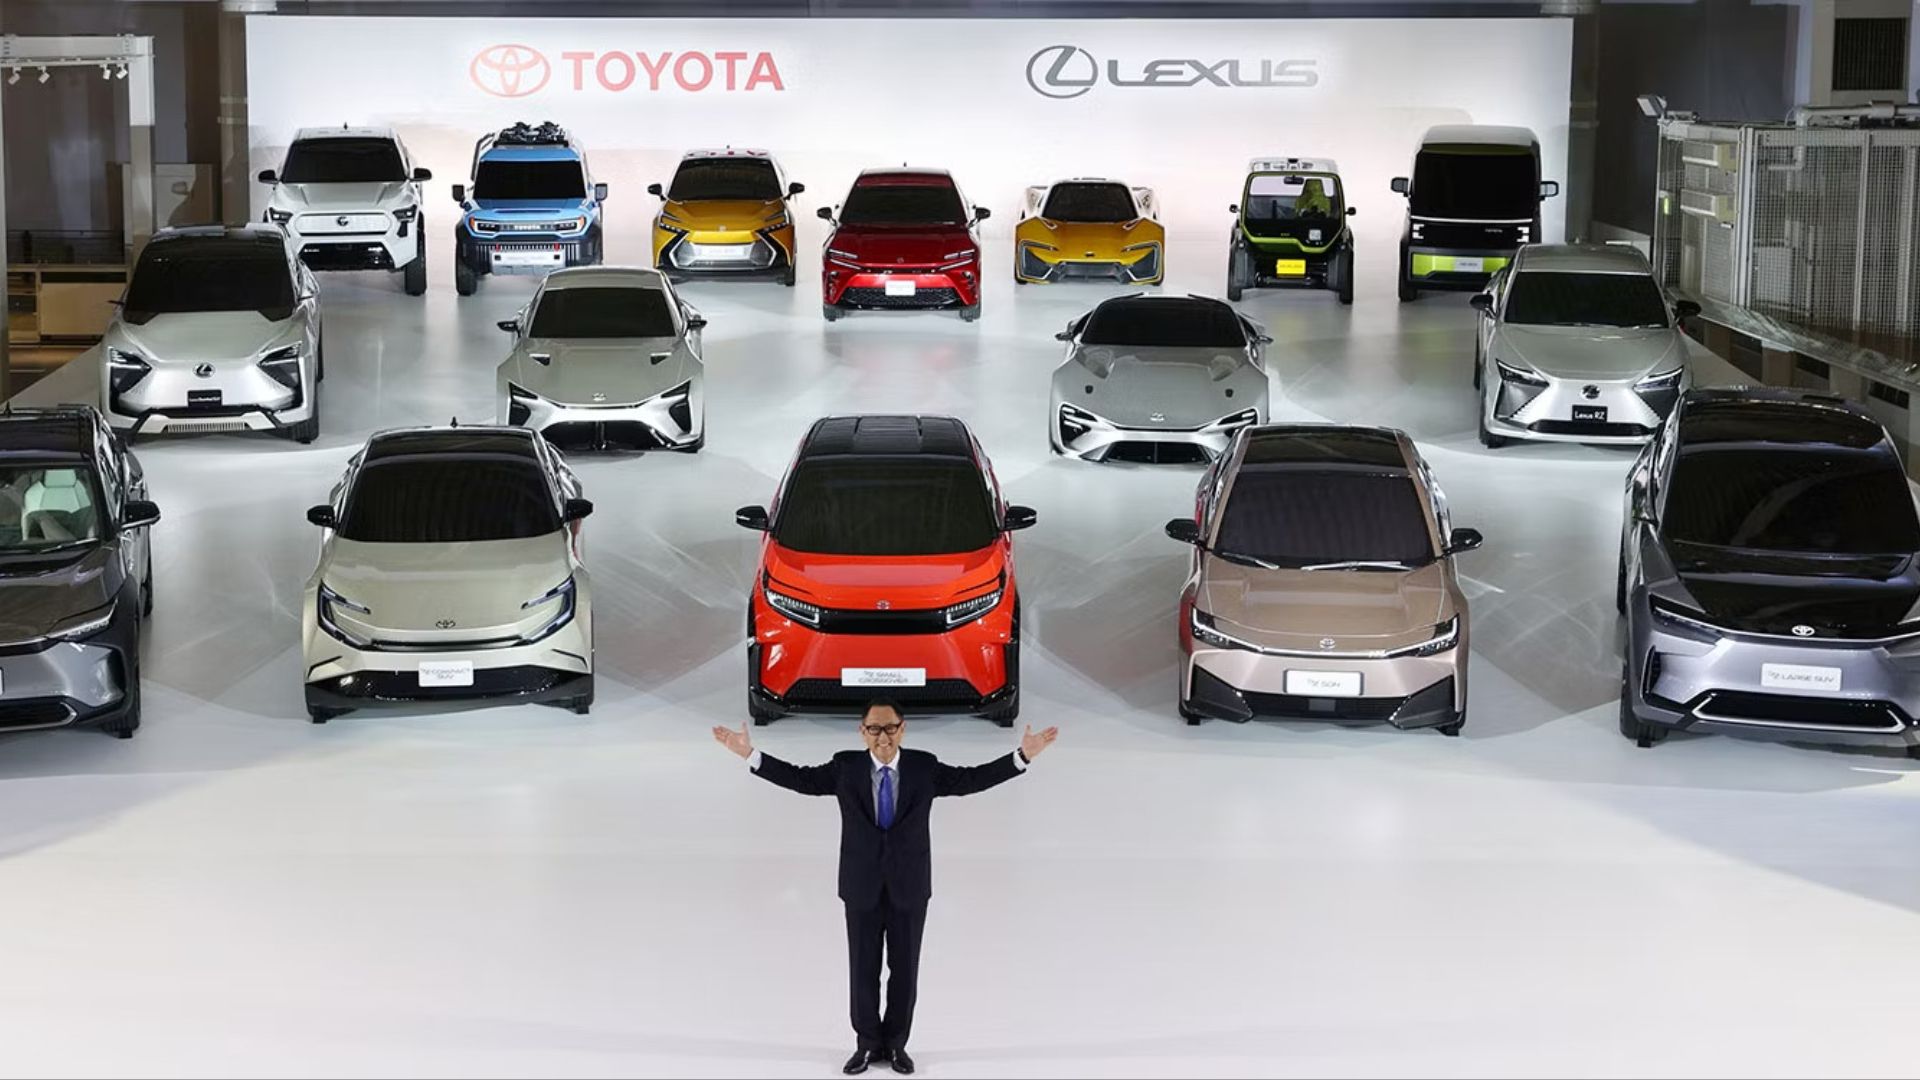 Like Tesla, Toyota are looking to conquer the EV market